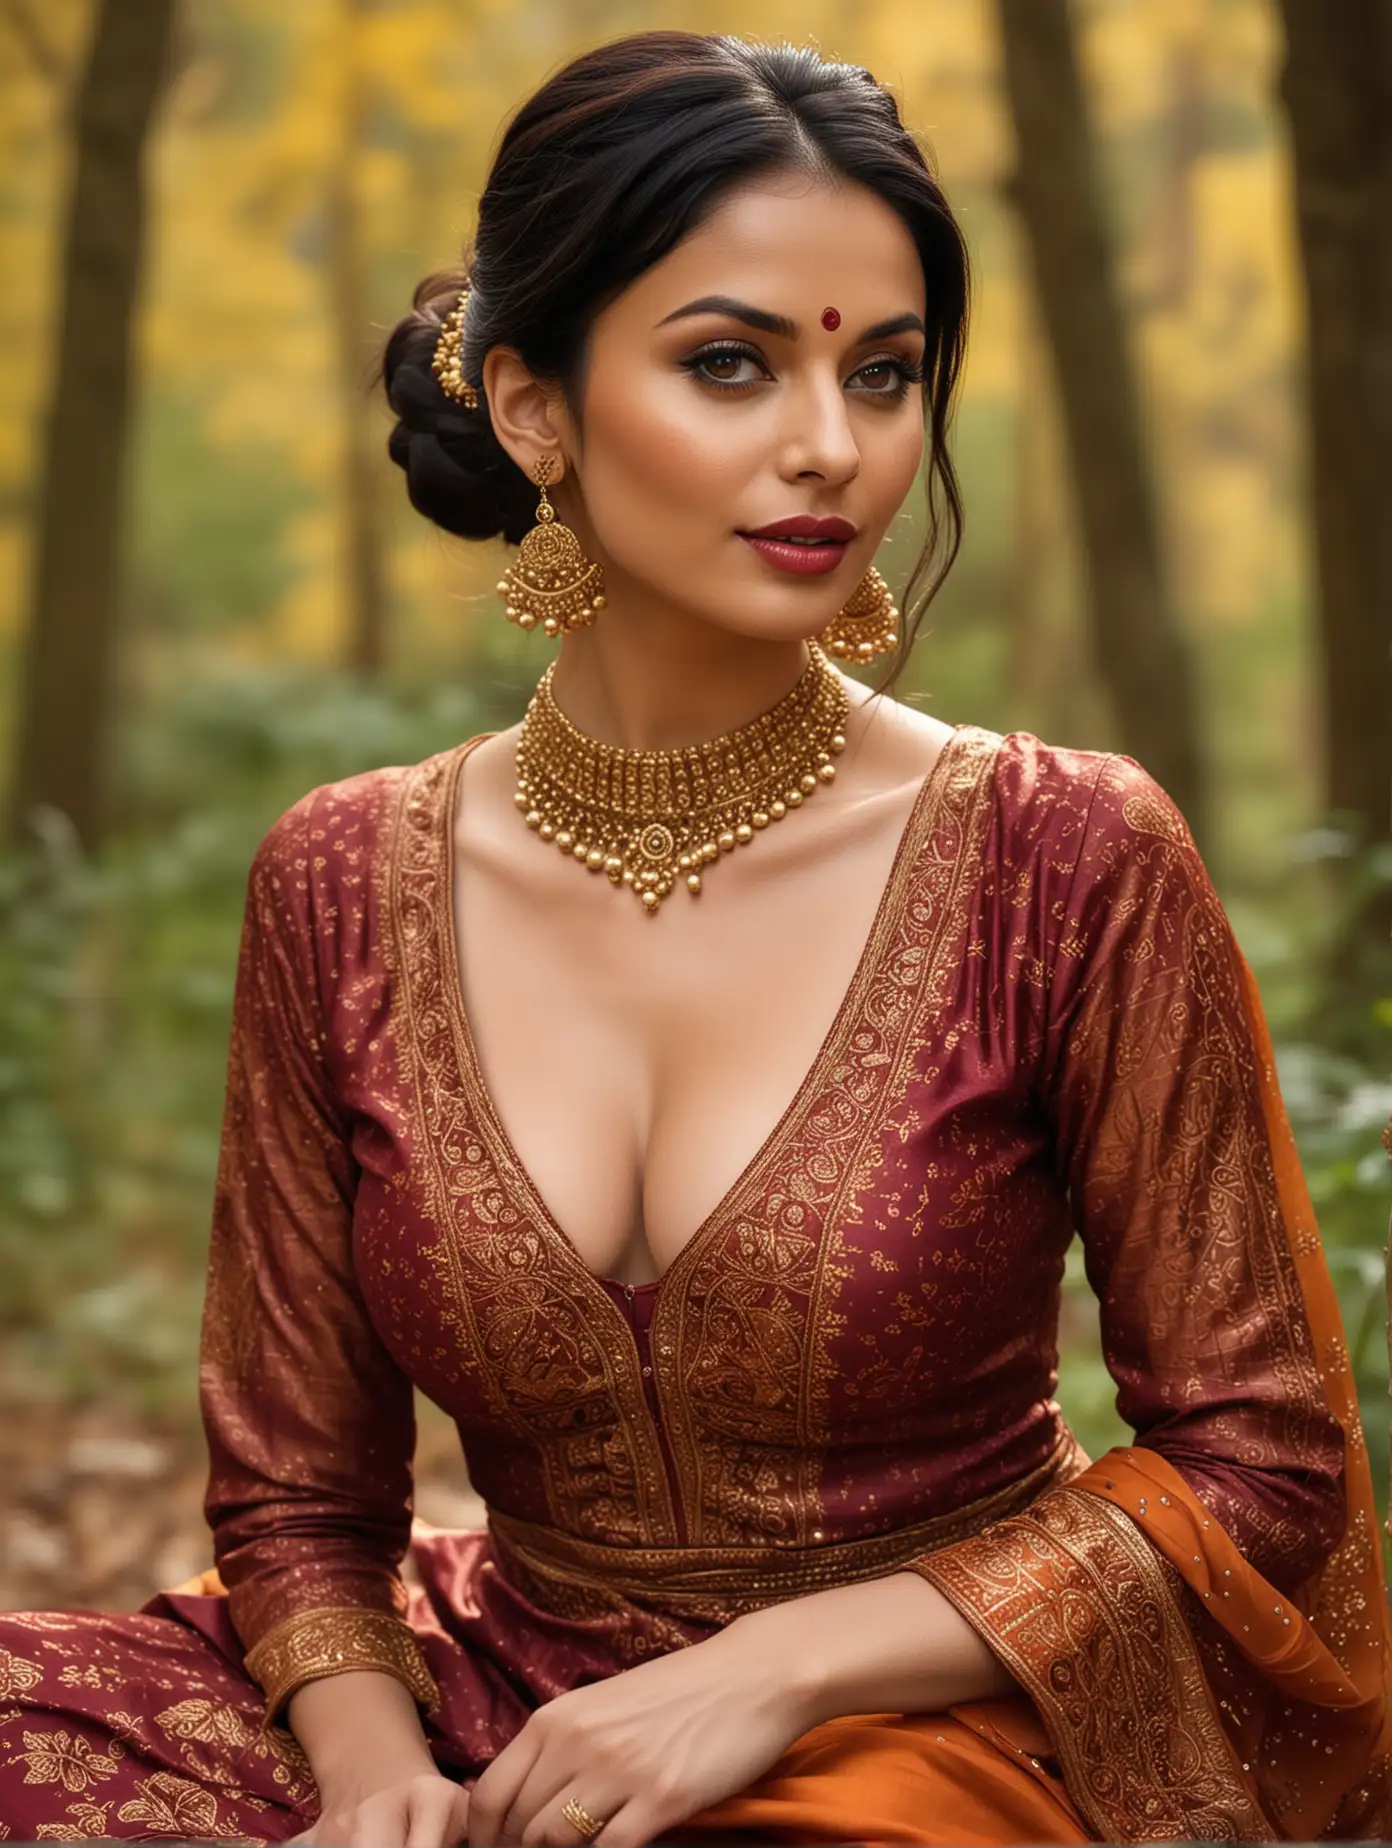 Very stunning, beautiful and sexy 30 year old British woman sensually dressed in an expensive maroon and orange Indian salwaar kameez, glossy look, seductive look, maroon lipstick, bun hairstyle, black hair, glow on face, intricate details, sitting in front of forest, only face, upper-body and background shown, blurry background, no hands shown, vivid colours, 4k, photo realistic 